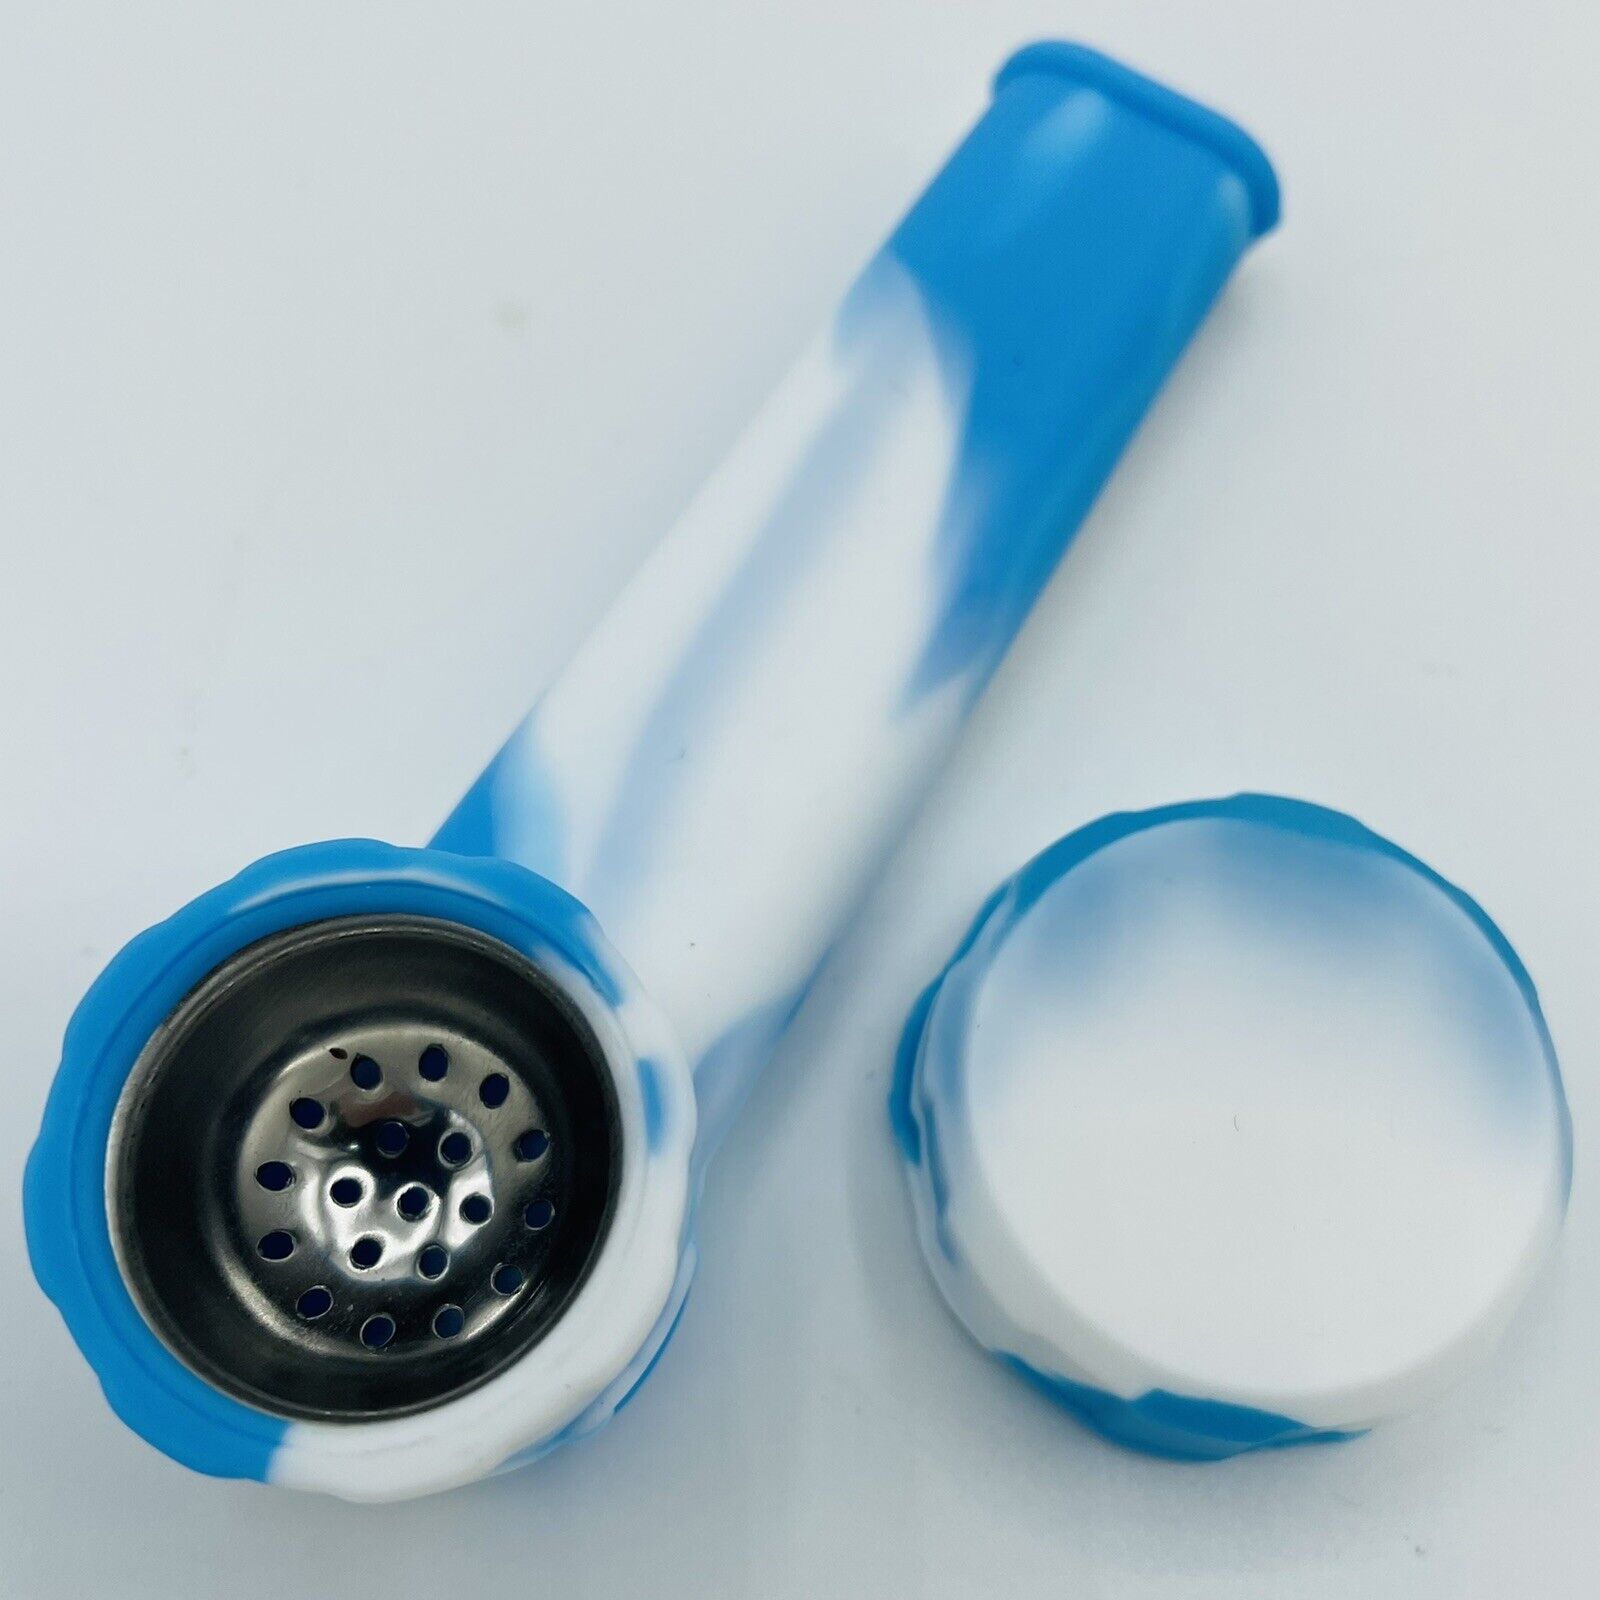 Silicone Smoking Pipe with Metal Bowl & Cap Lid | Light Blue/White  | USA